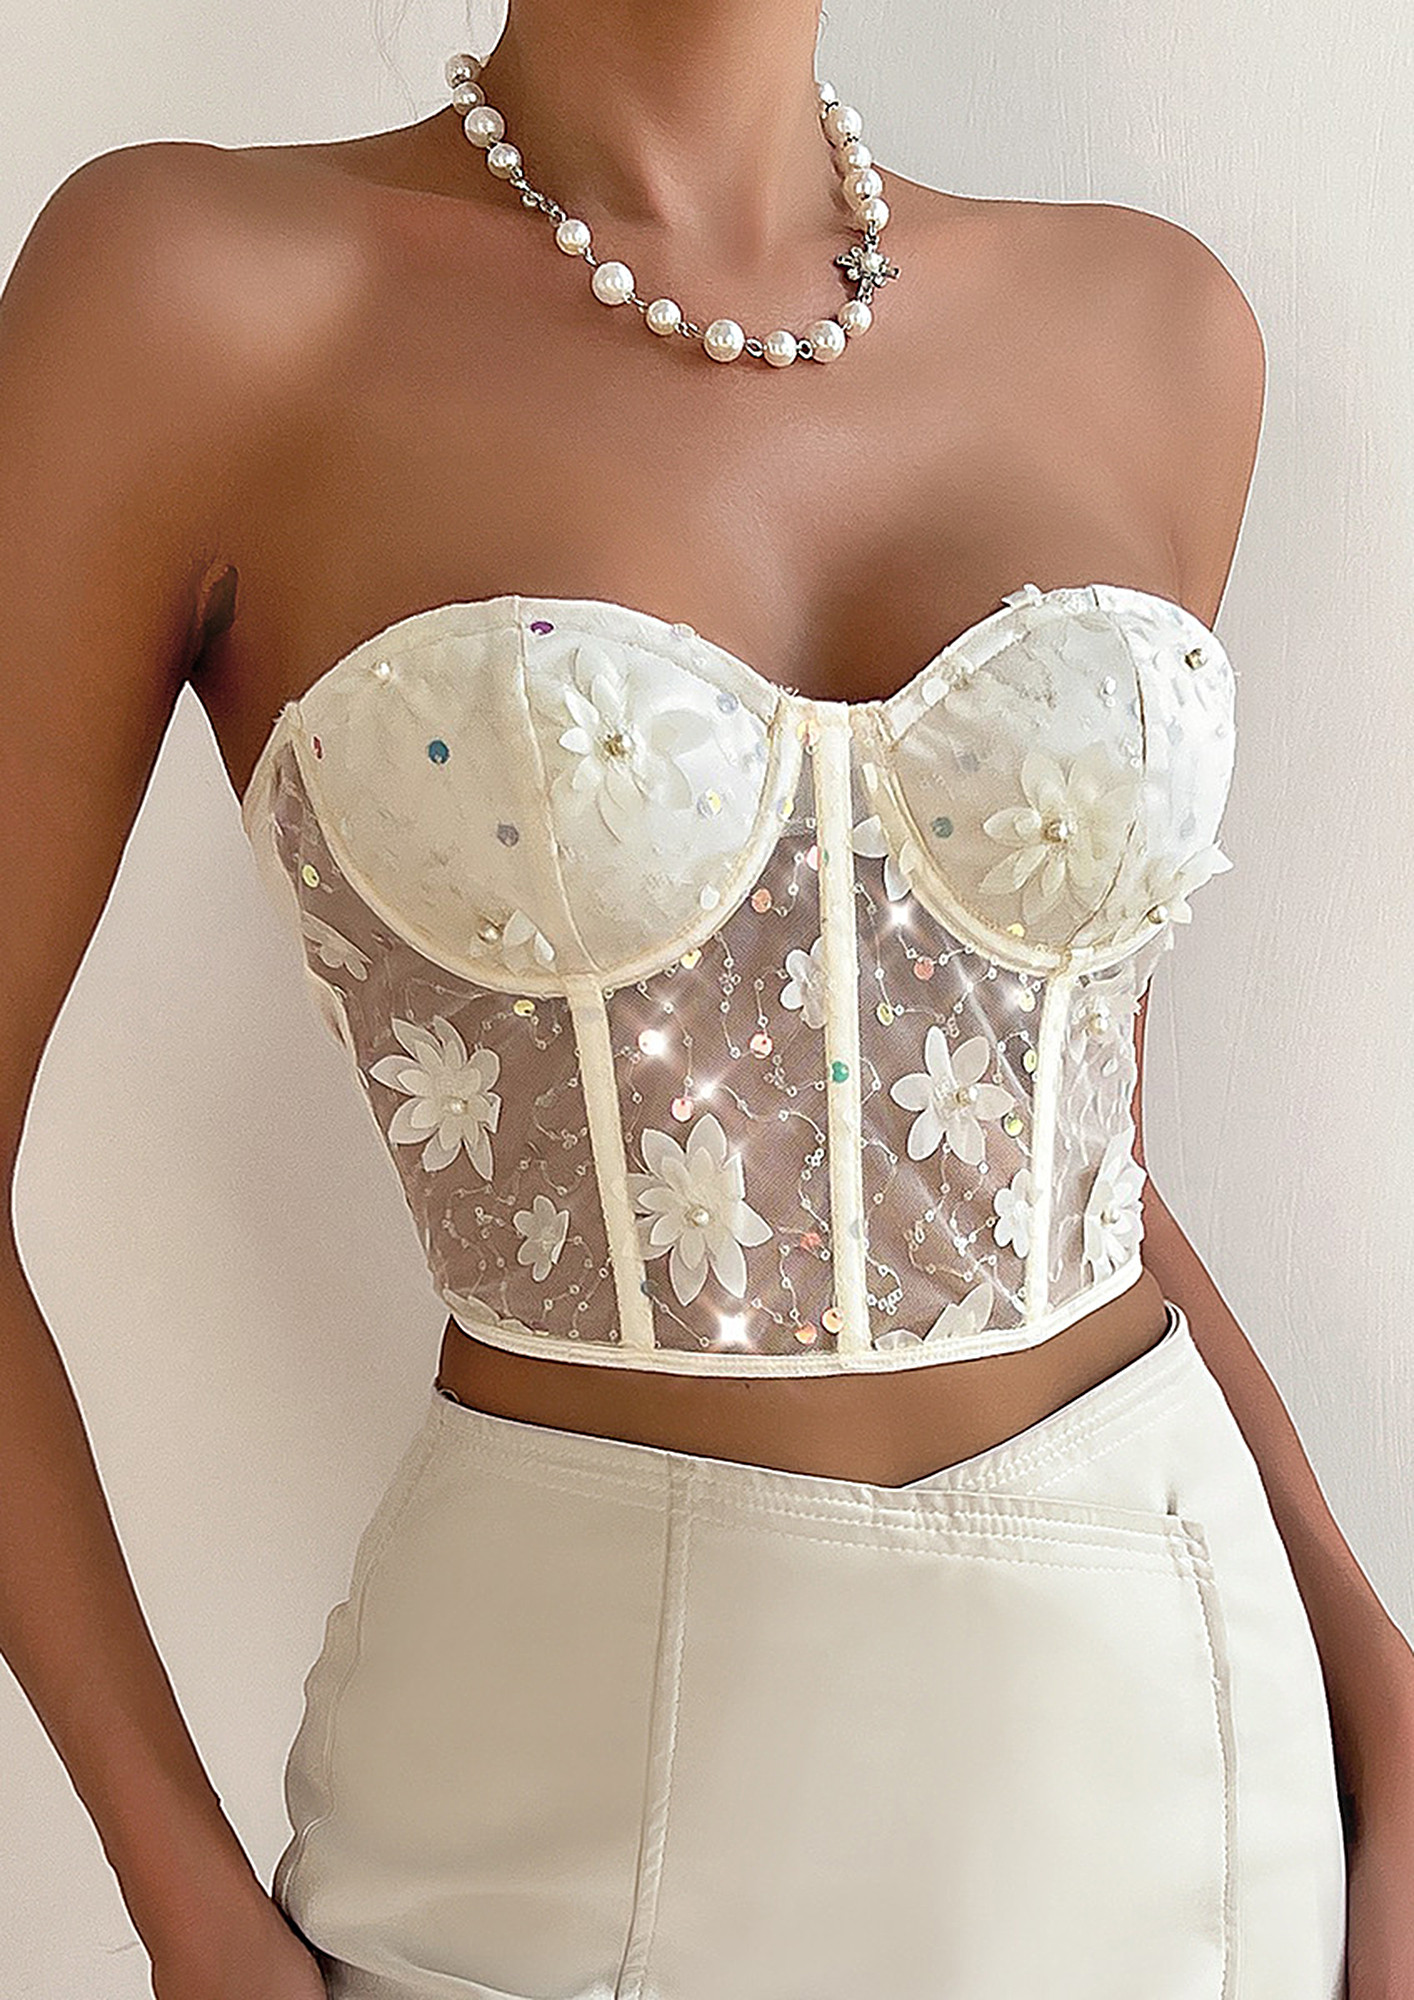 Buy Stylish Bustier Online for Women in India